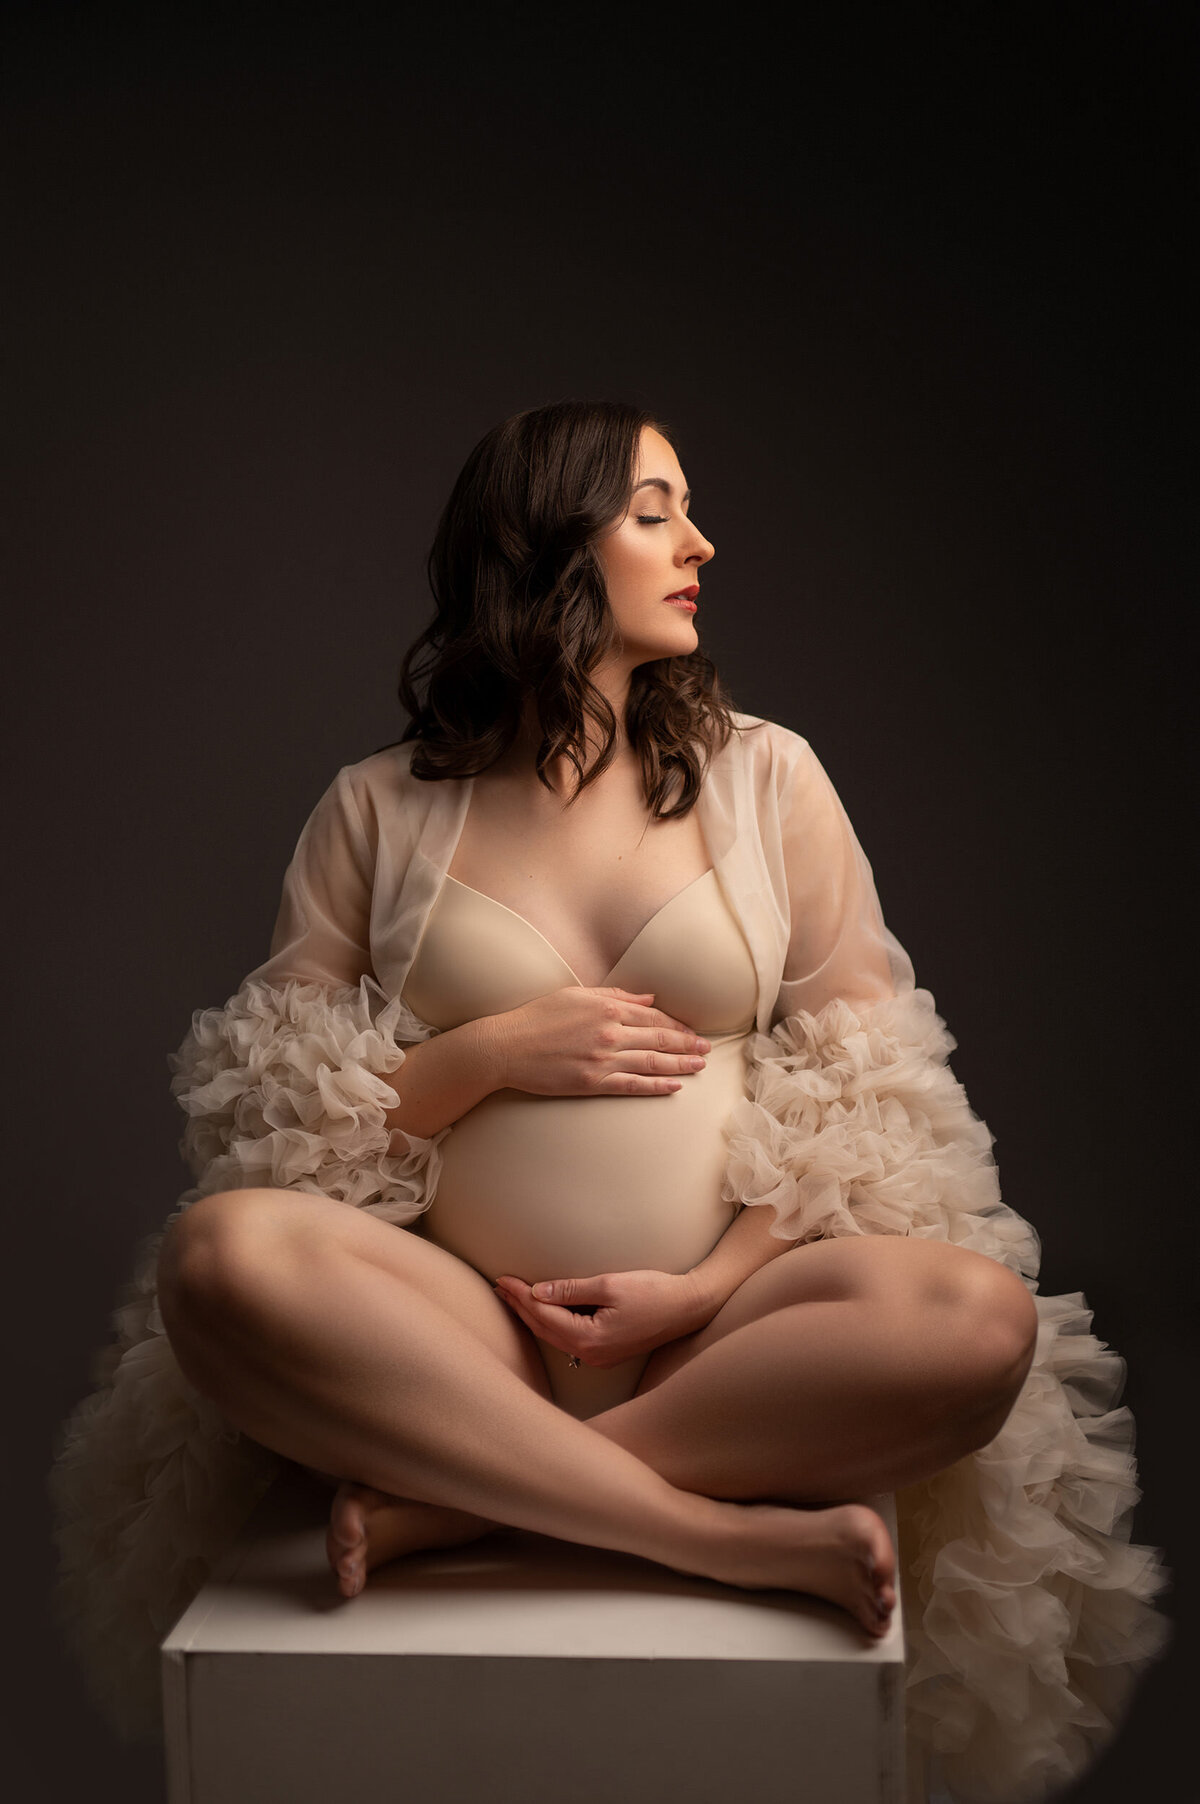 Maternity portrait of a barefoot woman seated cross-legged on a pedestal. She is wearing a nude body suit and matching sheer, ruffled robe with her eyes closed and head turned to her left.